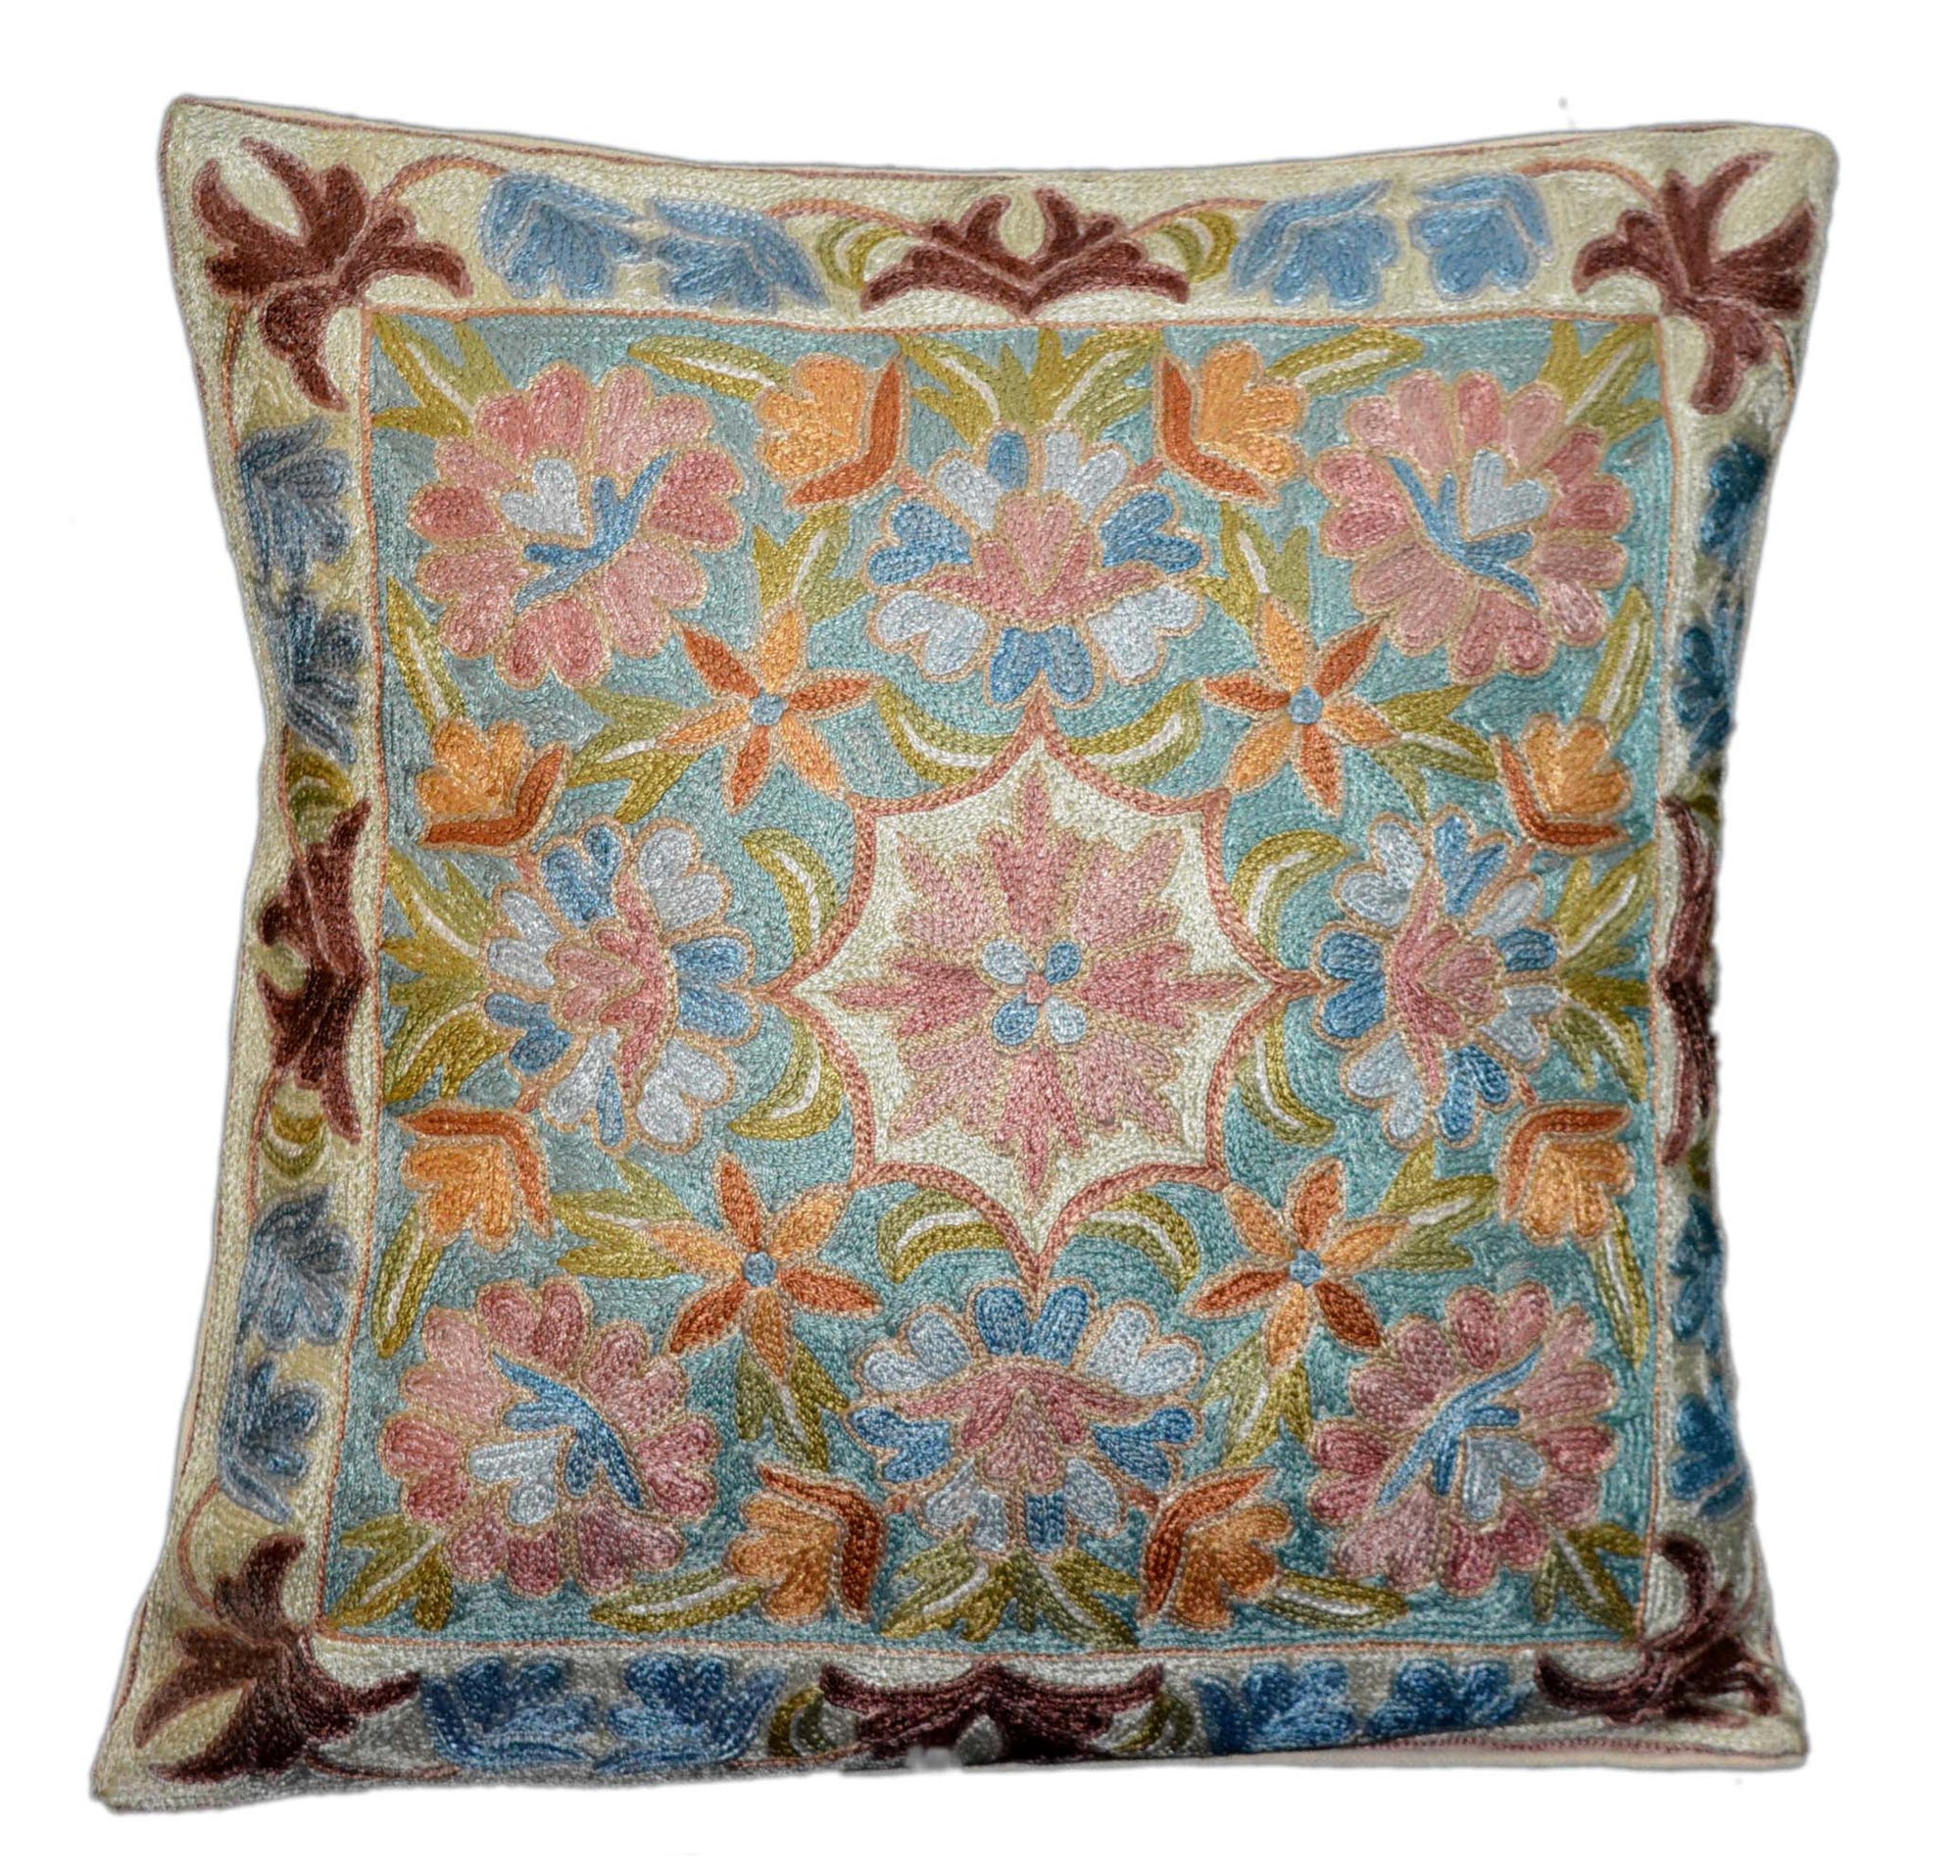 Crewel Silk Embroidered Cushion Throw Pillow Cover, Multicolor #CW2012